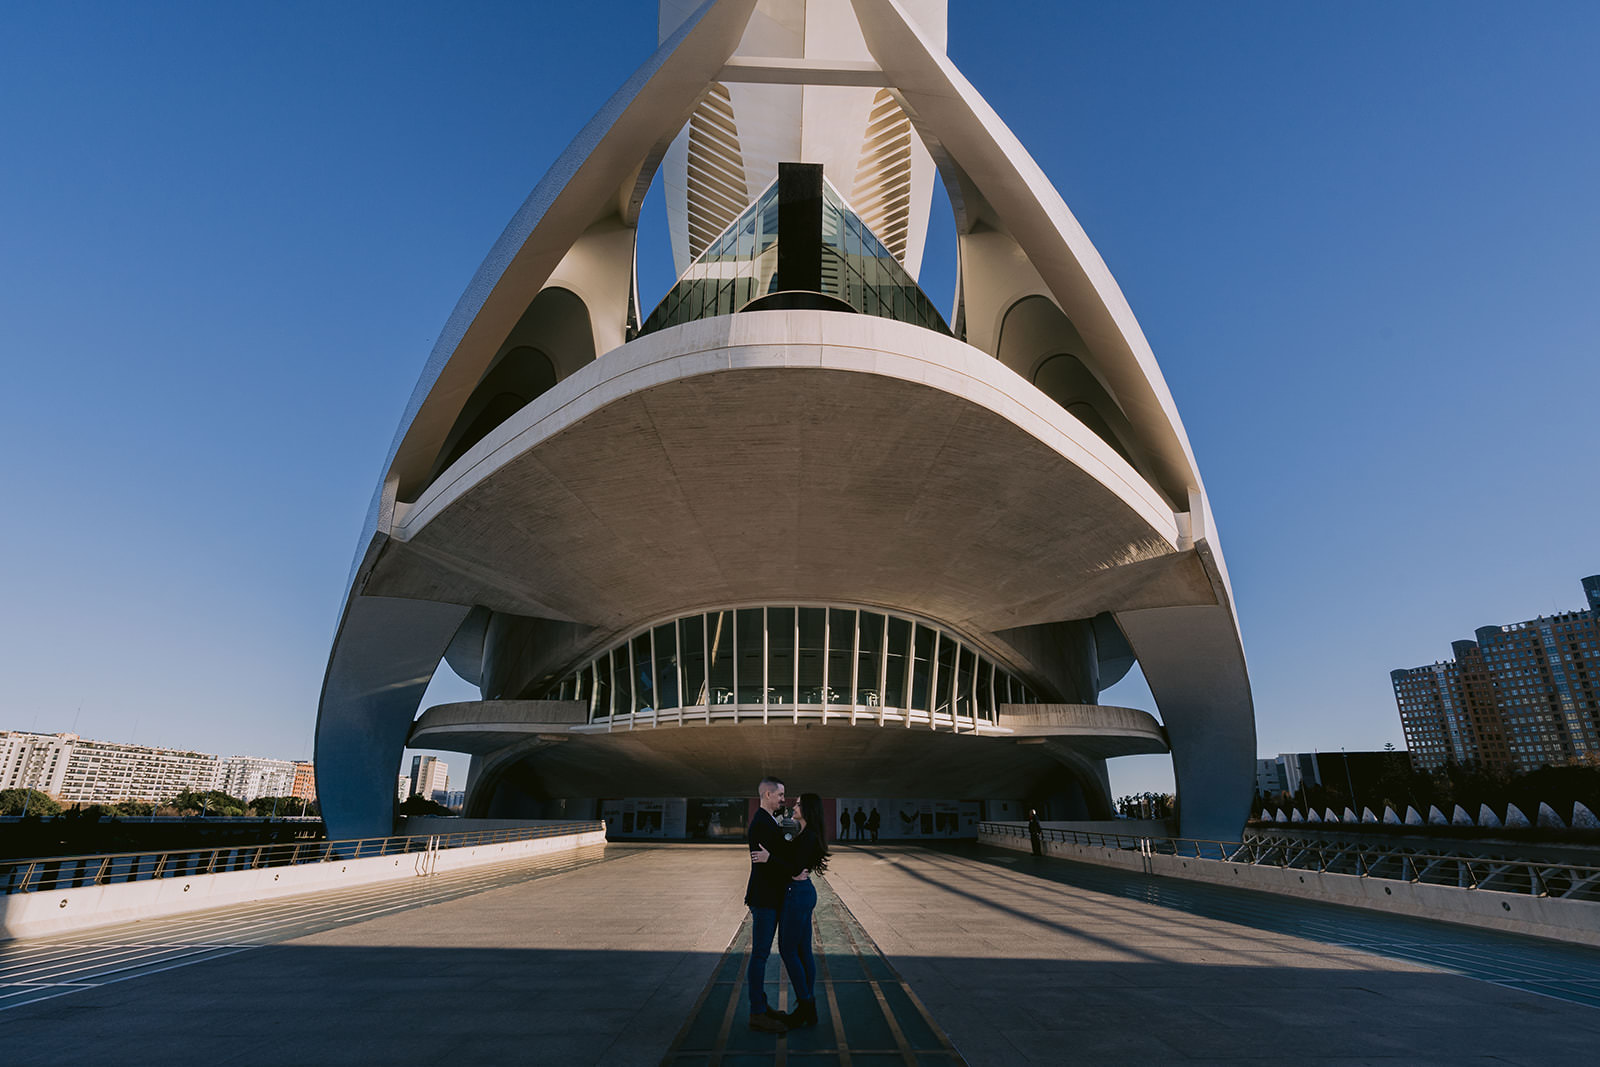 the City of Arts and Sciences in Valencia